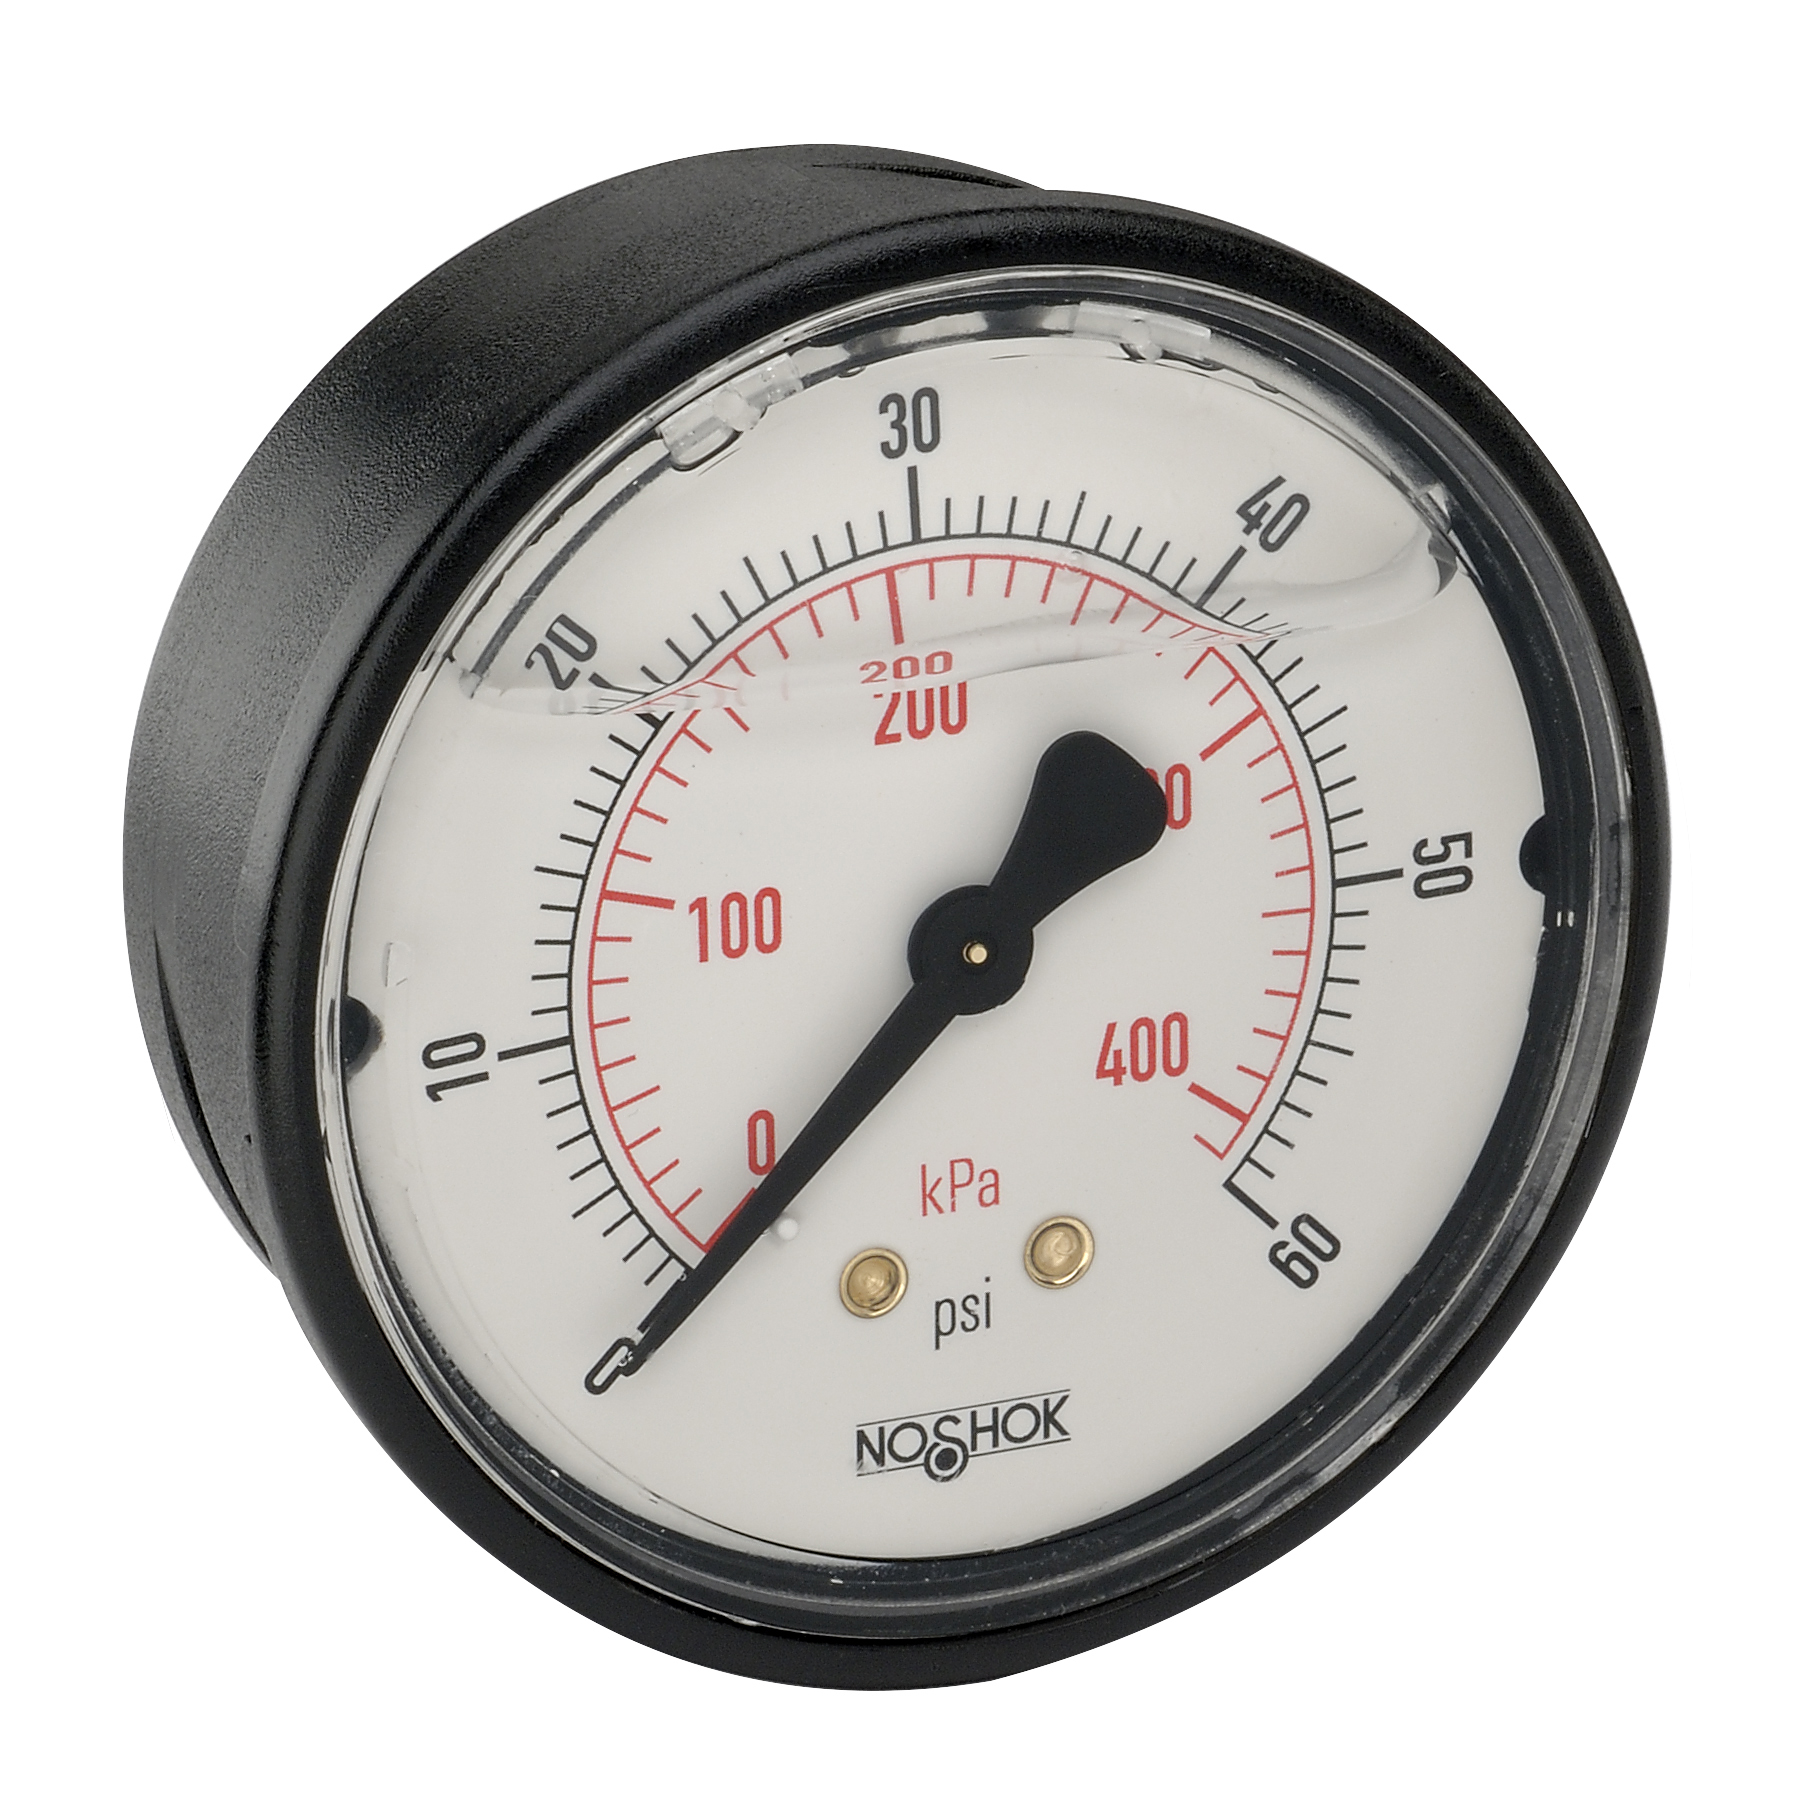 25-911-10000-psi/bar-SSFF 900 Series ABS and Stainless Steel Liquid Filled Pressure Gauges